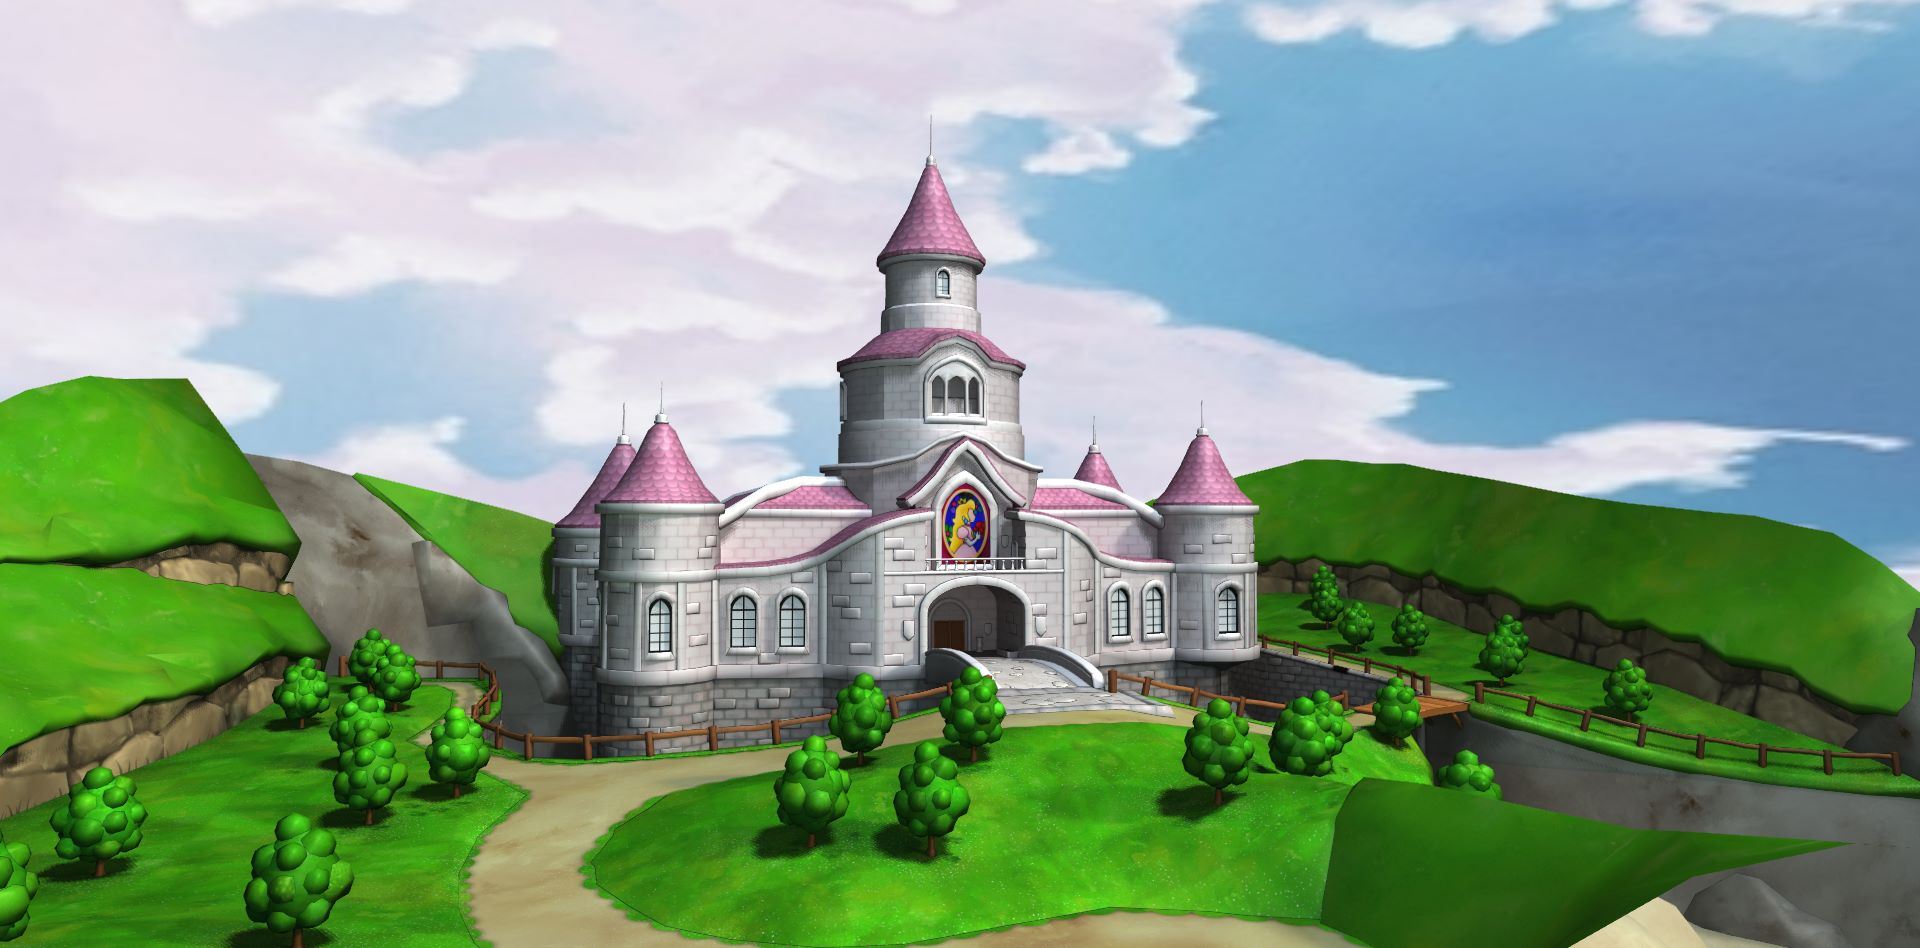 Peach Castle | ArtisGL 3D Publisher - Online, Real-Time and Interactive ...